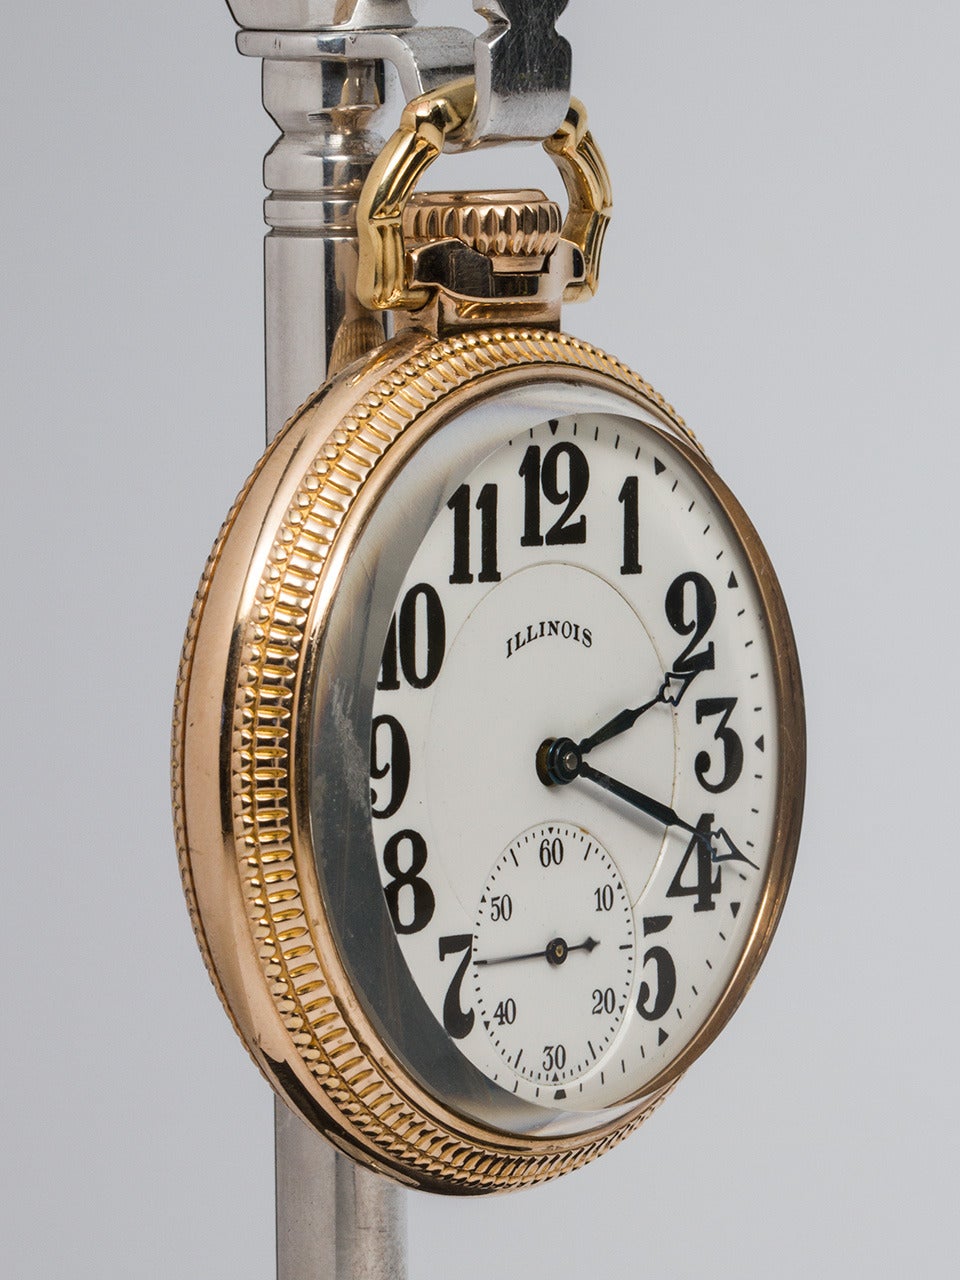 Illinois yellow gold-filled railroad-grade Bunn Special pocket watch. Featuring double-sunk illionis dial with large black Arabic numerals, 21-jewel lever-set Bunn Special movement. Great looking high-grade model certified for use on America's